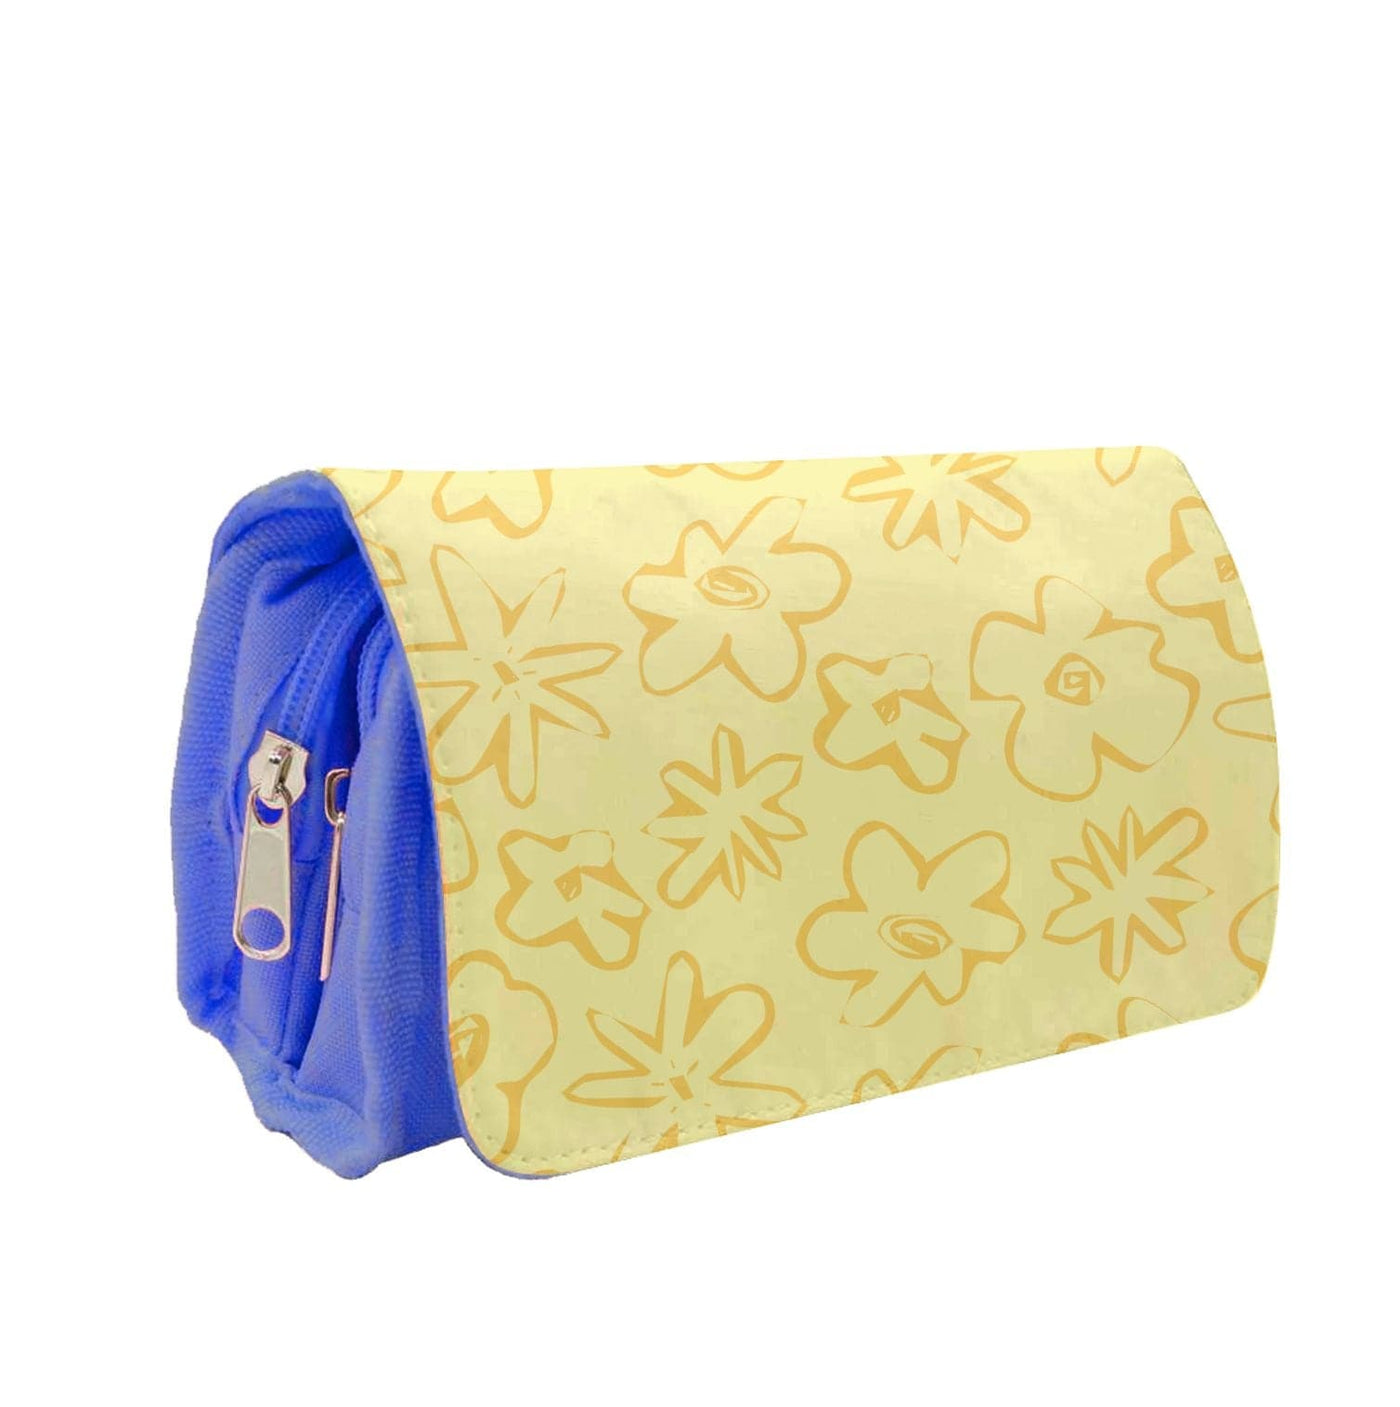 Yellow And Orange - Floral Patterns Pencil Case